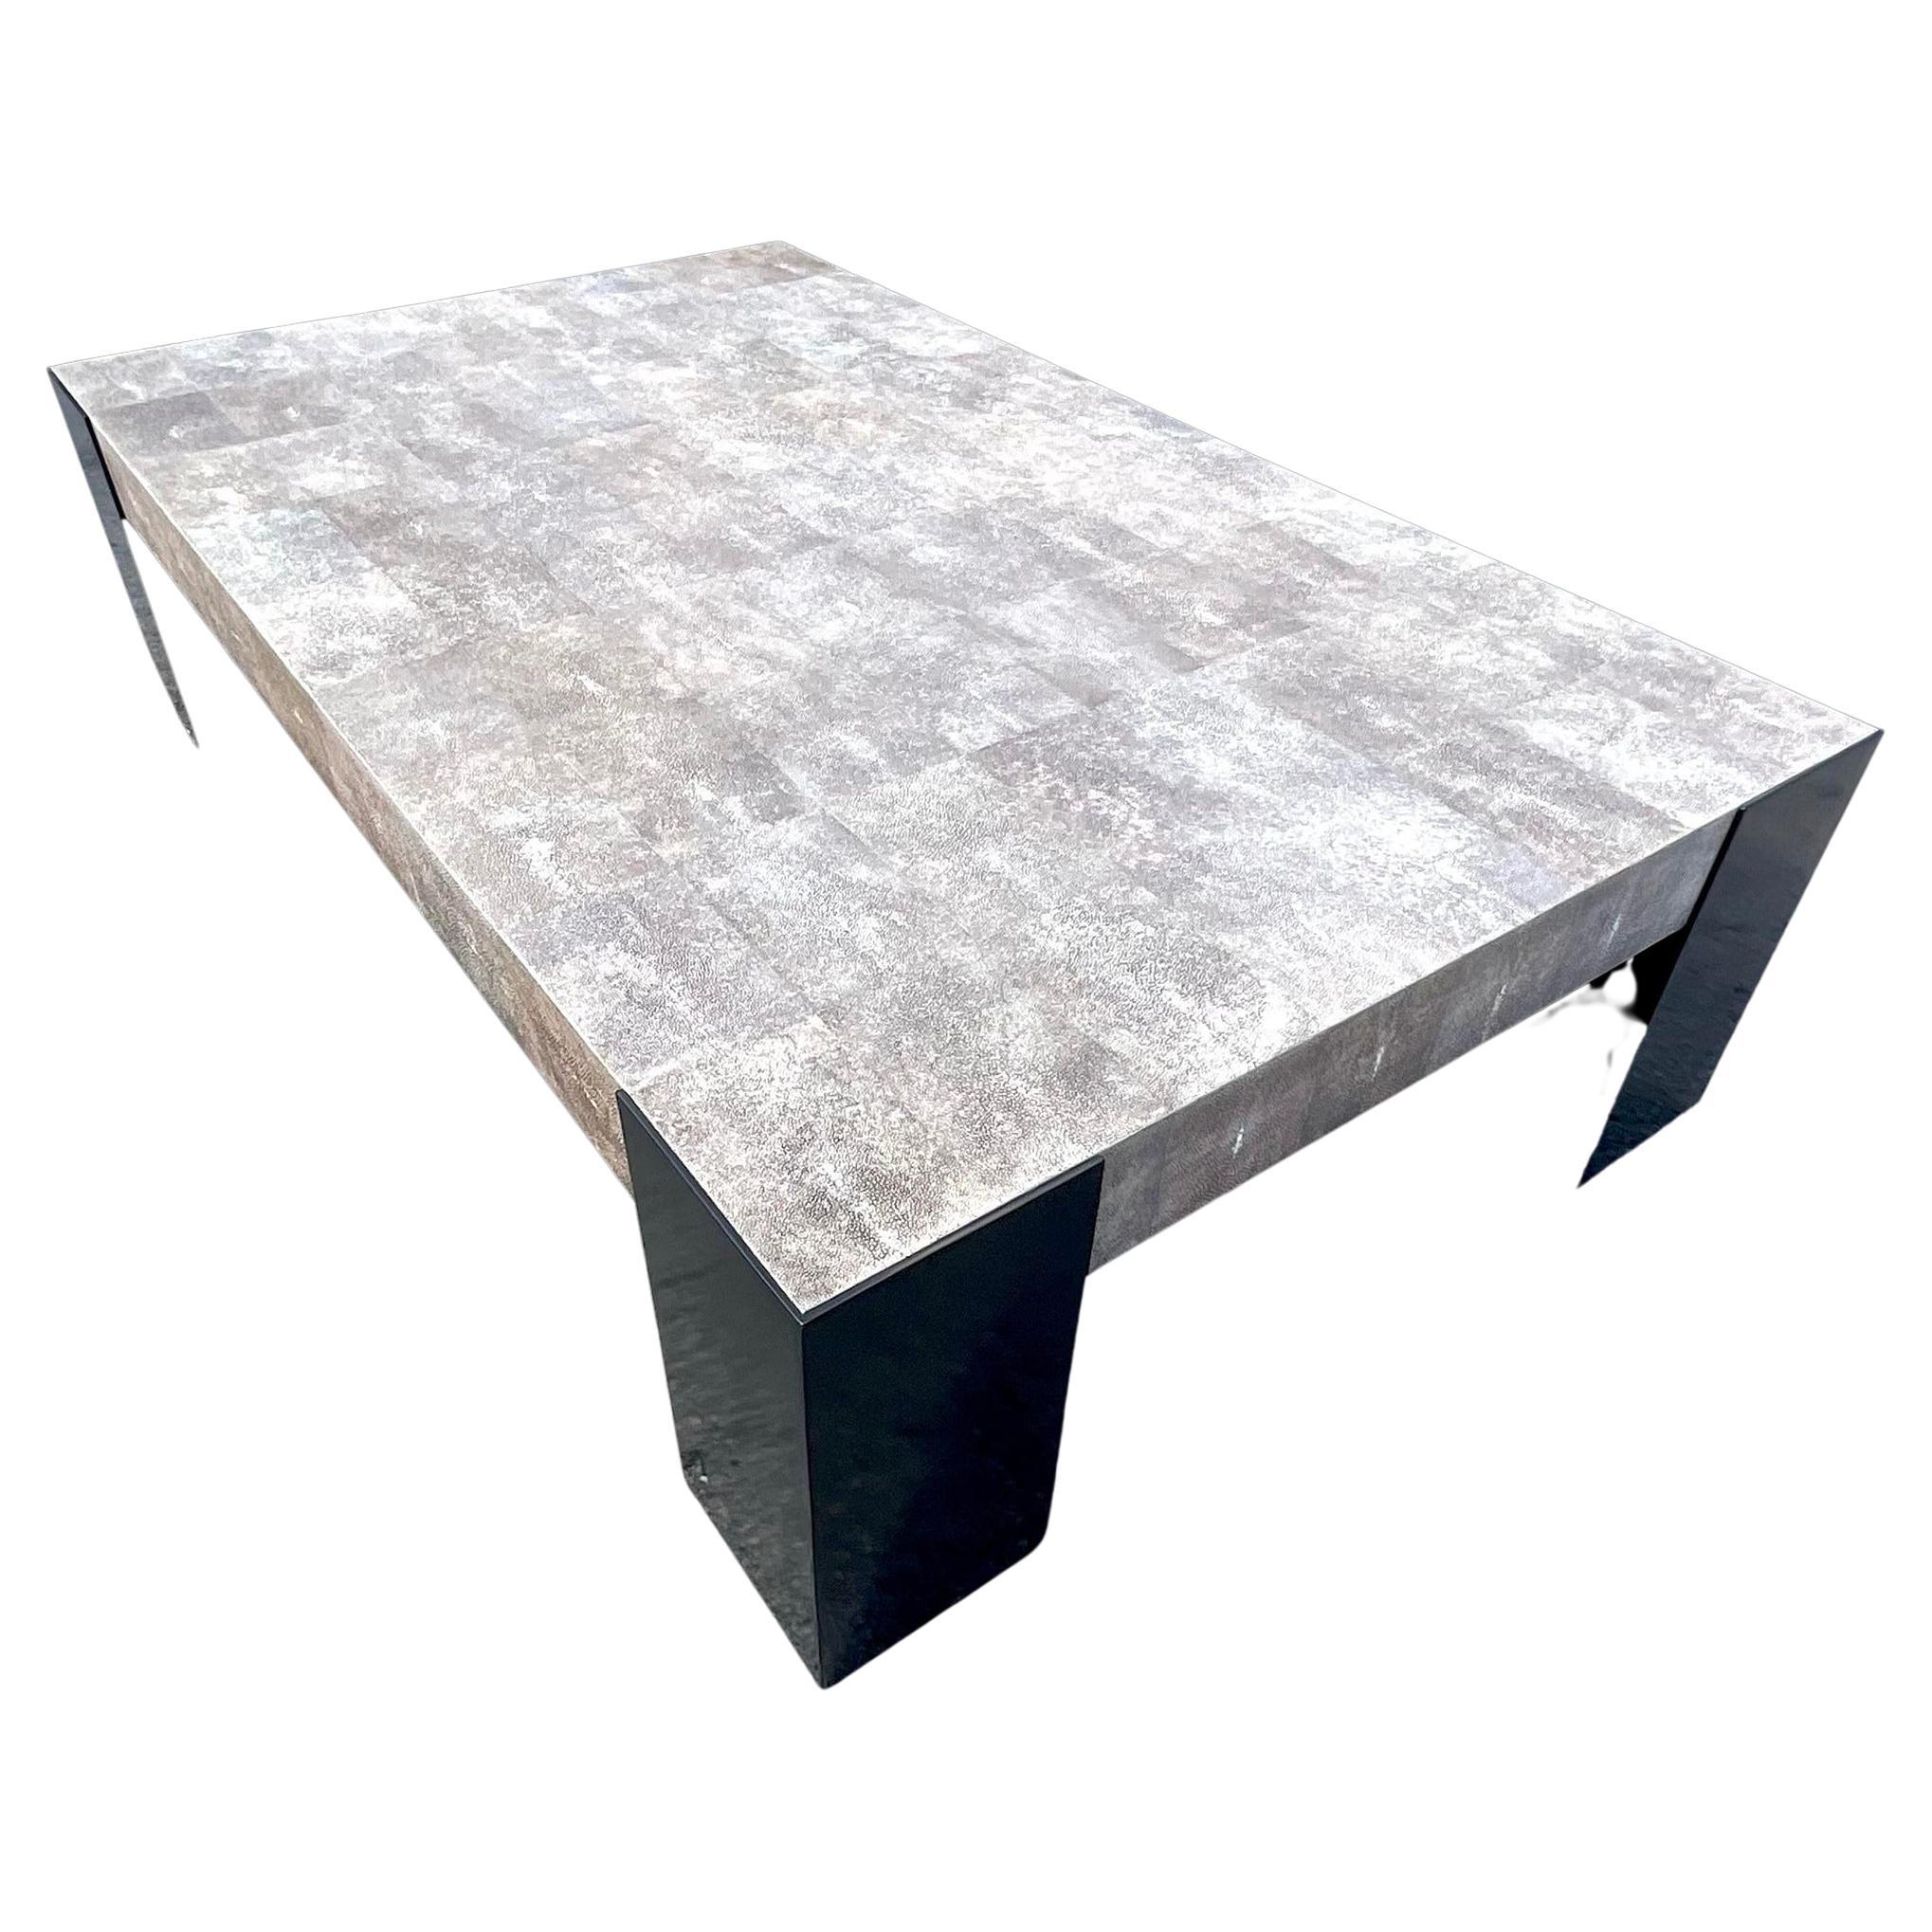 Vintage Contemporary Alexander Lamont Stingray & Bronze Patina Coffee Table For Sale